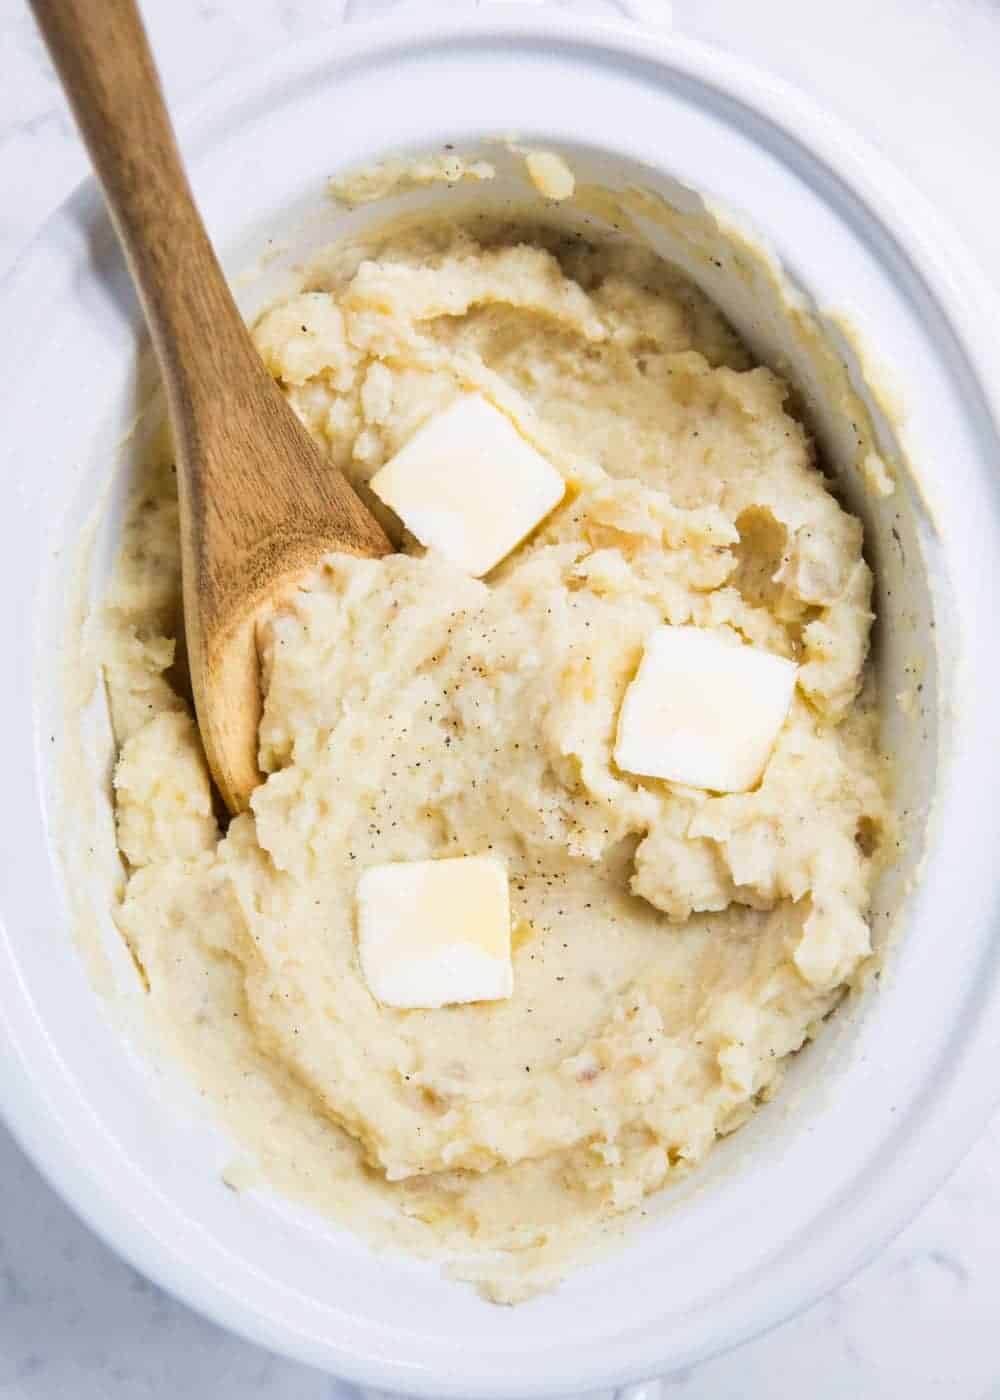 Mashed potatoes in the crock pot with a wooden spoon.